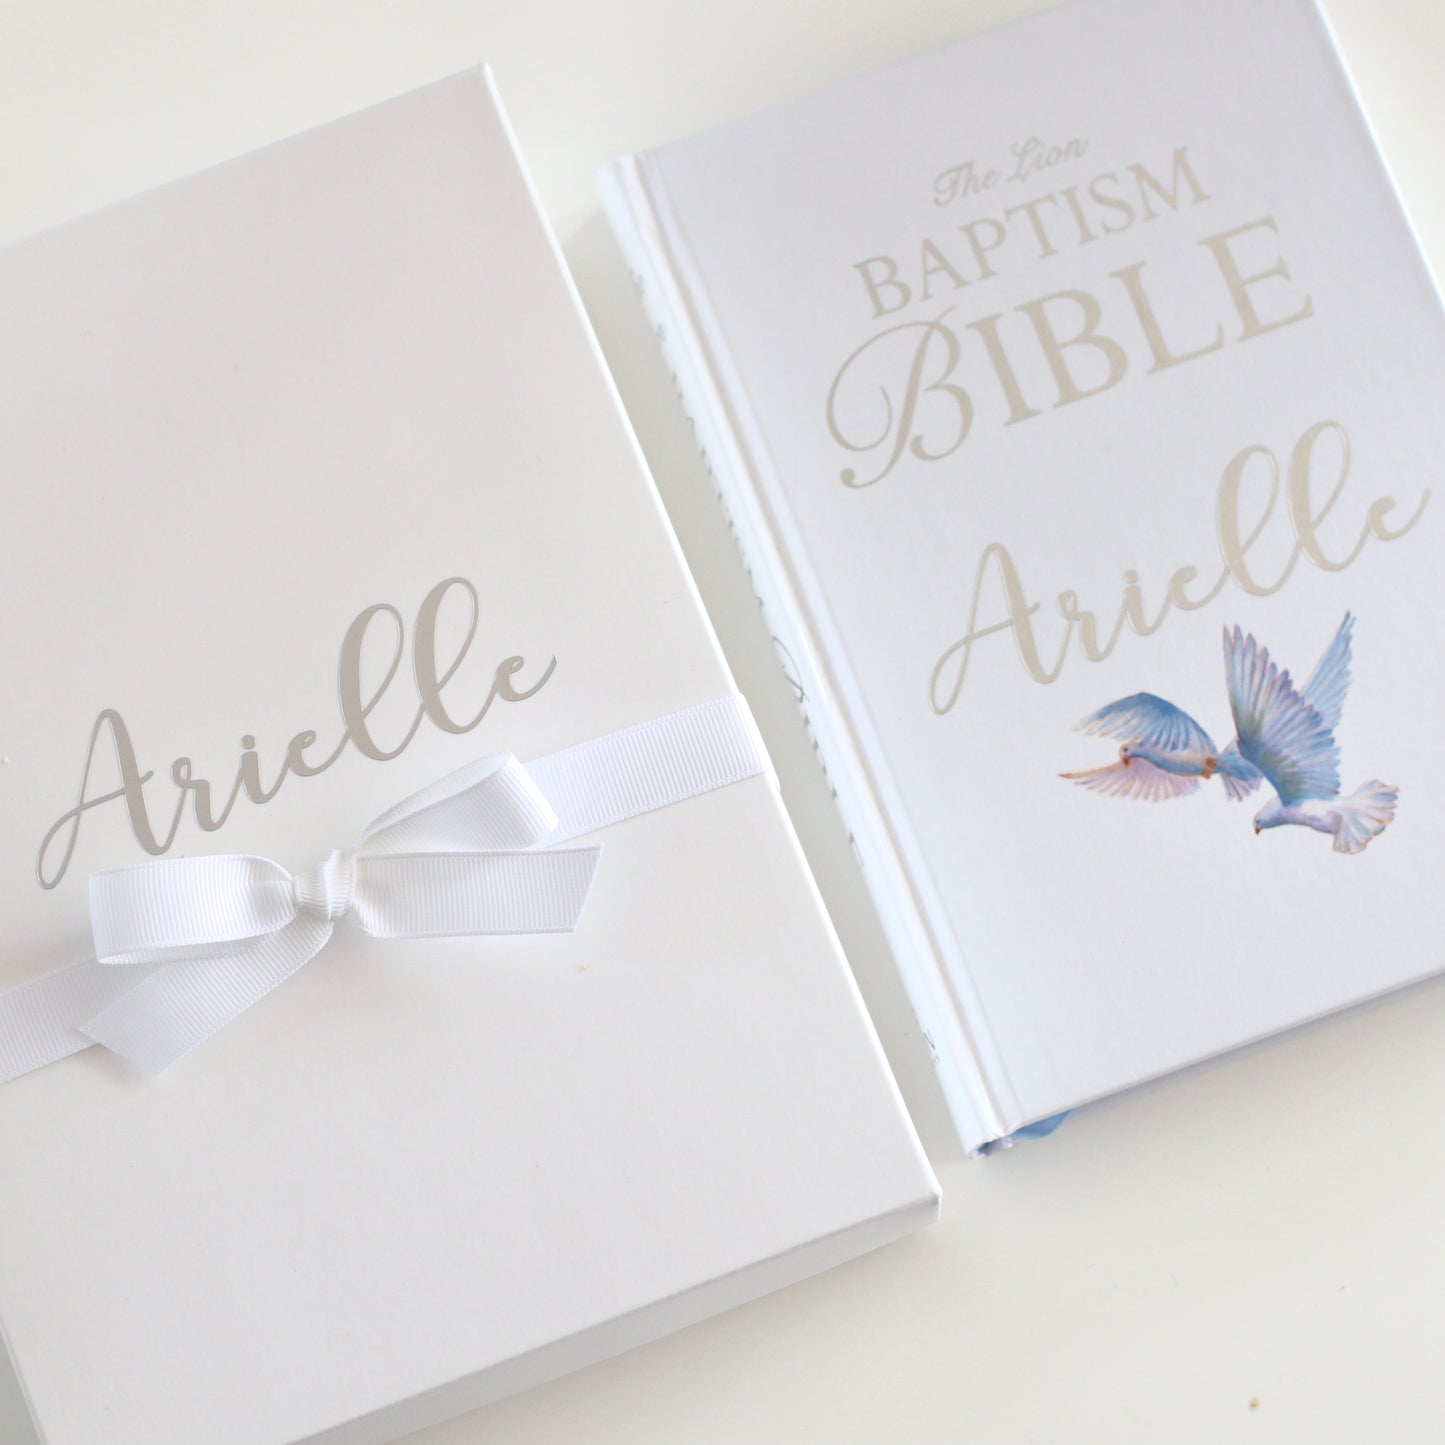 The Baptism Bible (Personalised) - The bible comes in a beautiful keepsake box, which is made to match the personalisation on the bible.